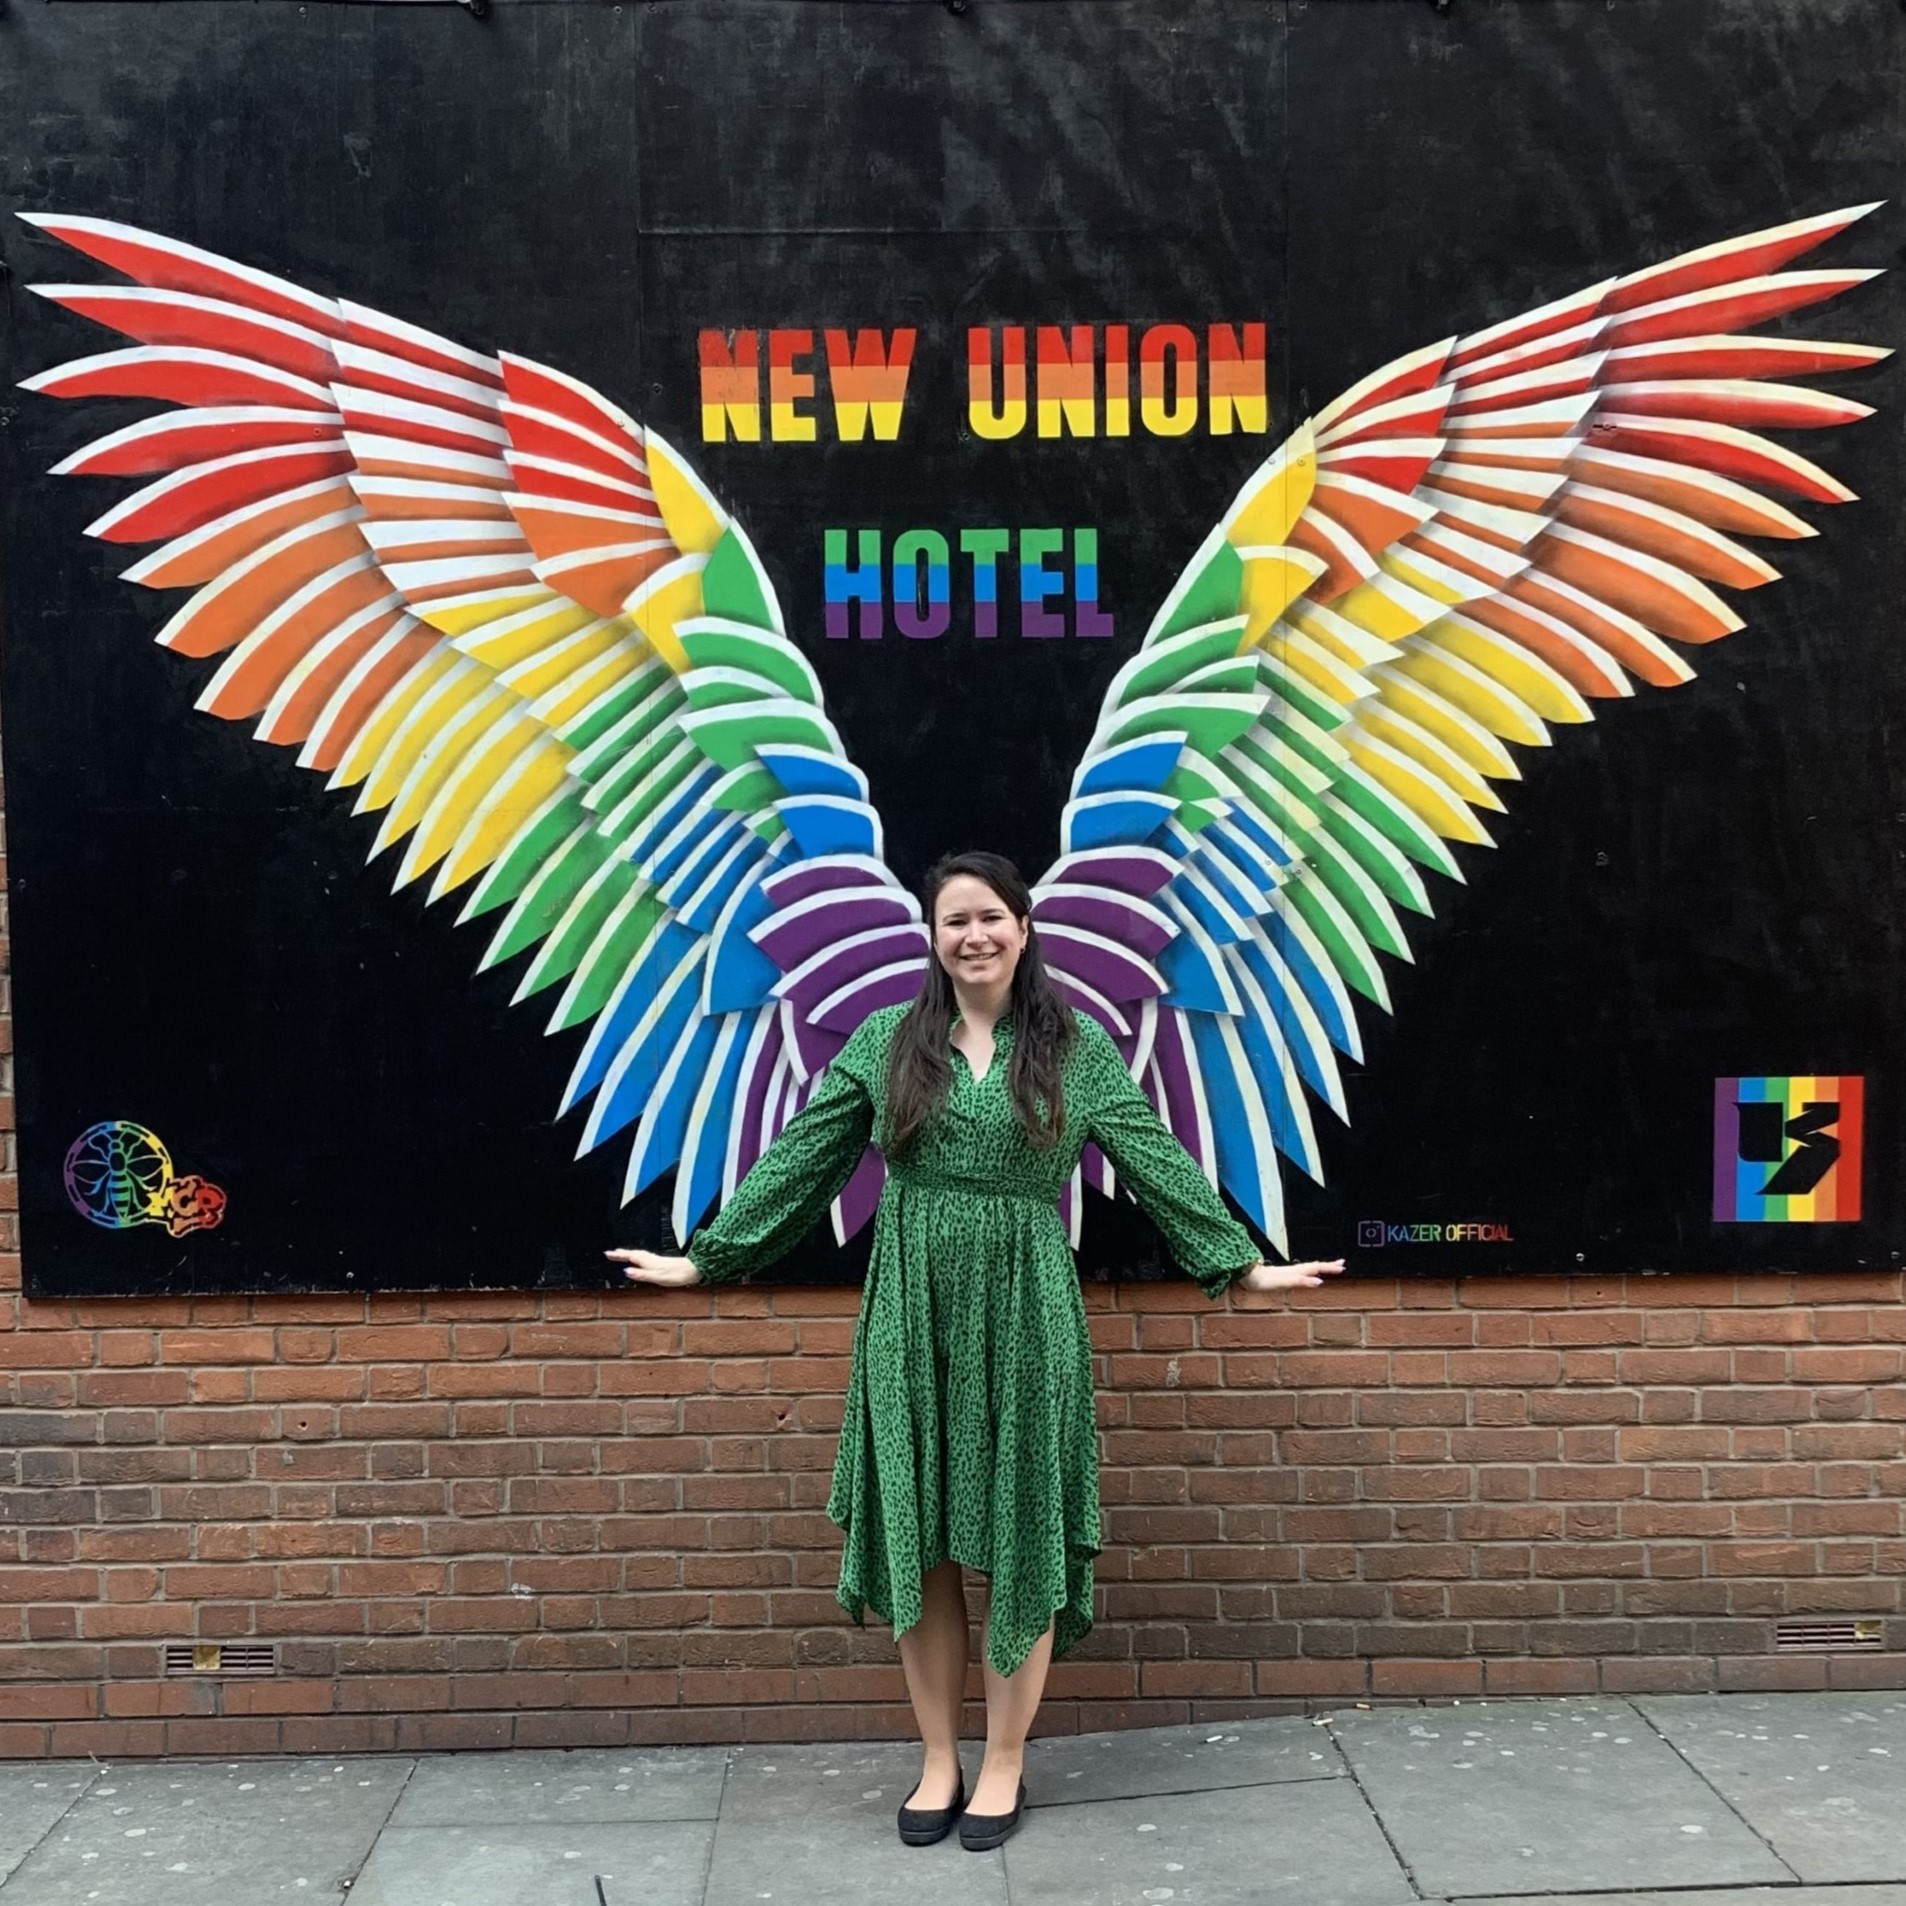 Zoe stands smiling in a green and black dress. Her arms are out to the side and the wall behind her has a mural of rainbow wings